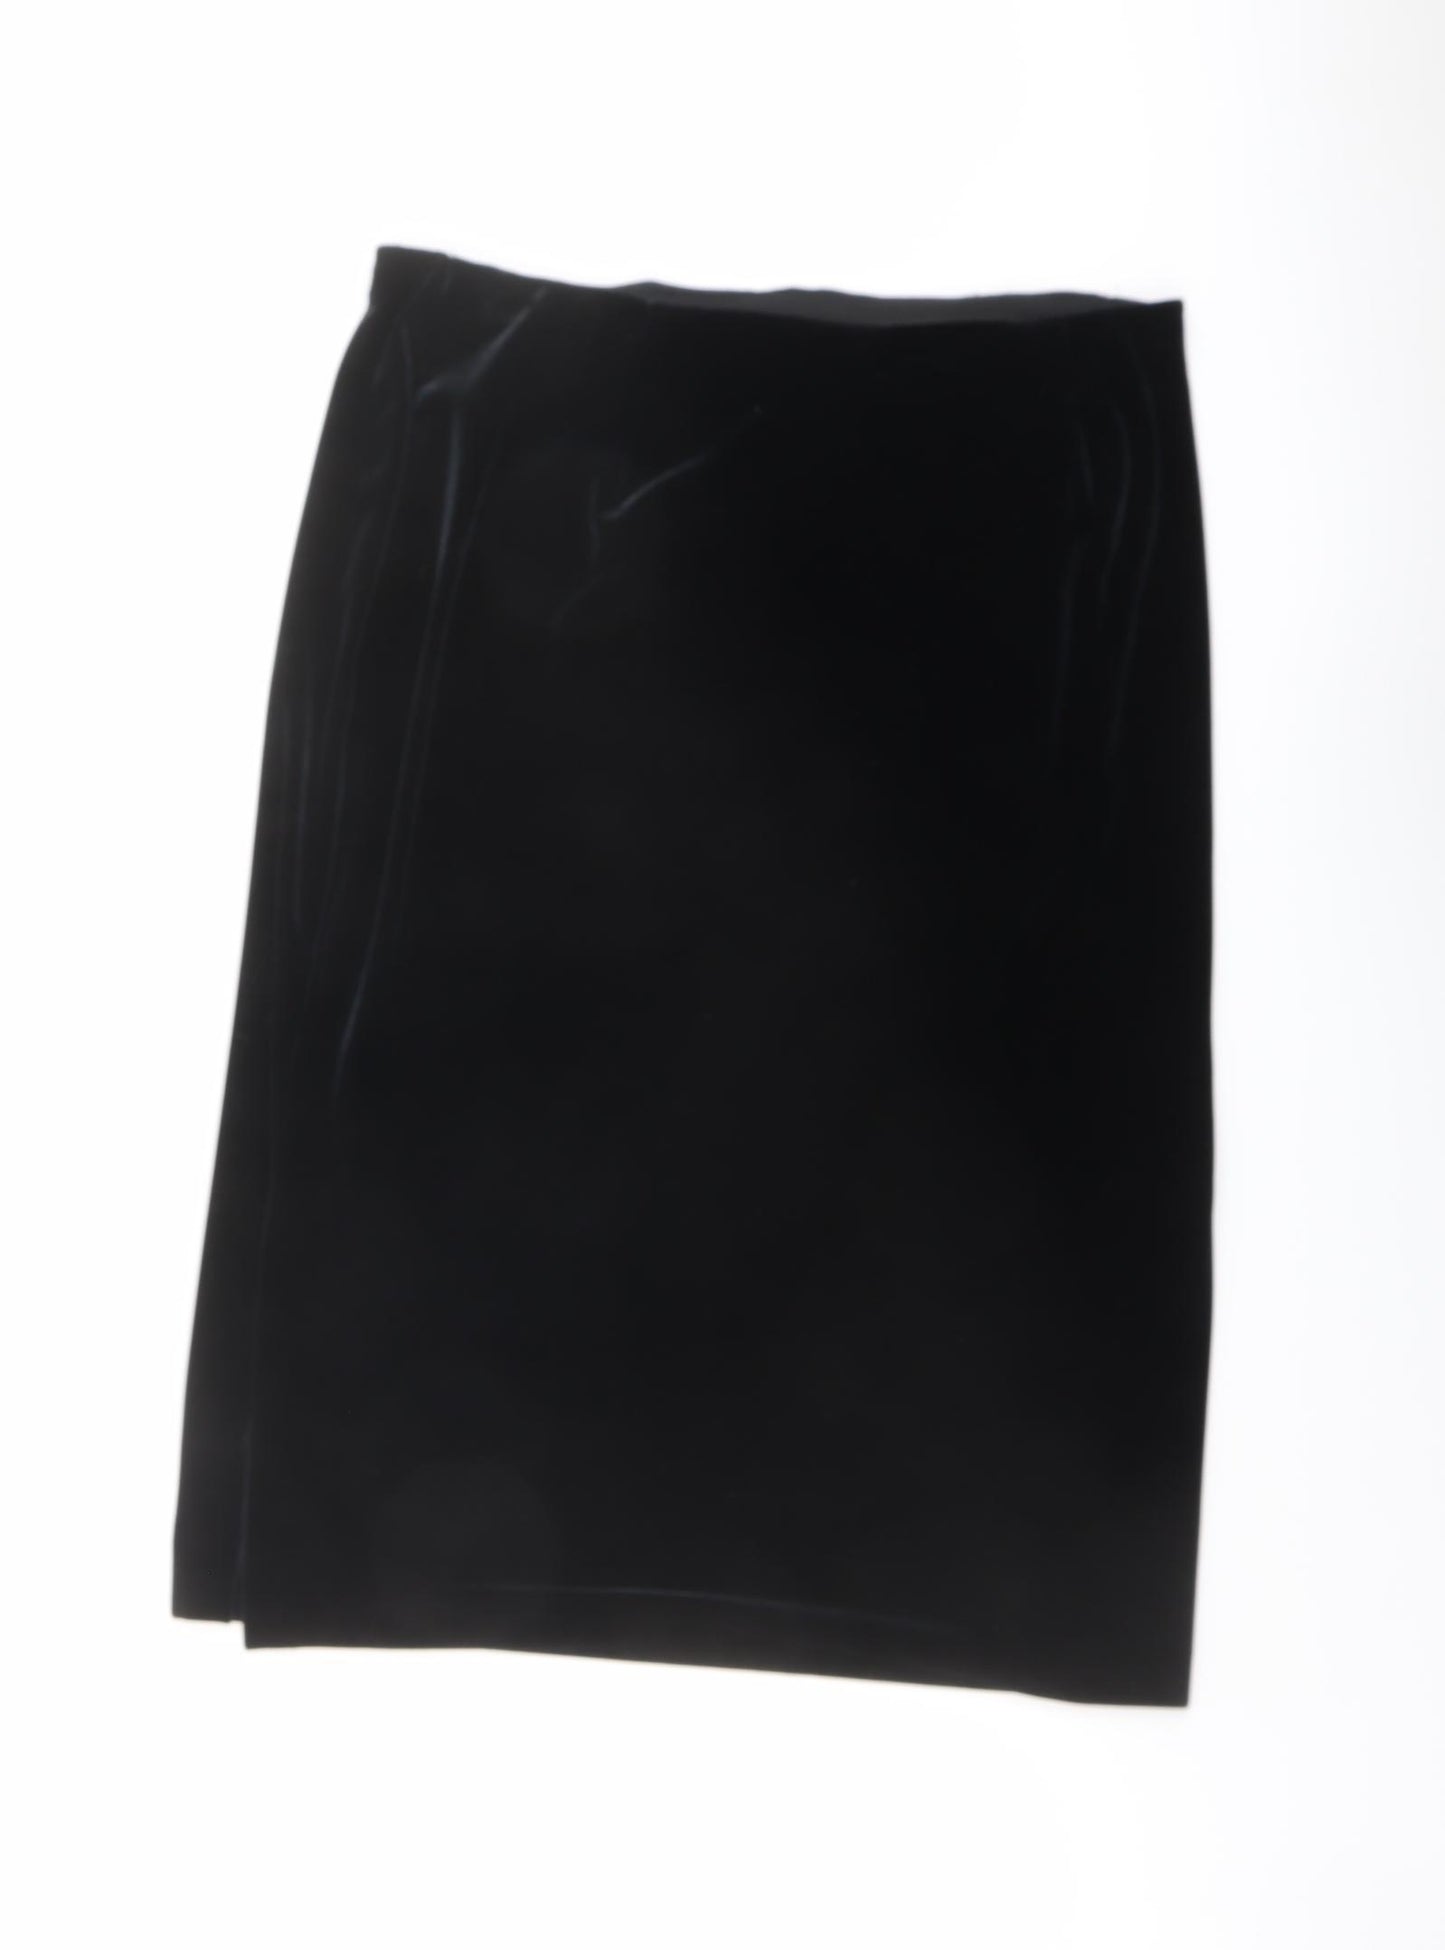 Marks and Spencer Womens Black Polyester A-Line Skirt Size 18